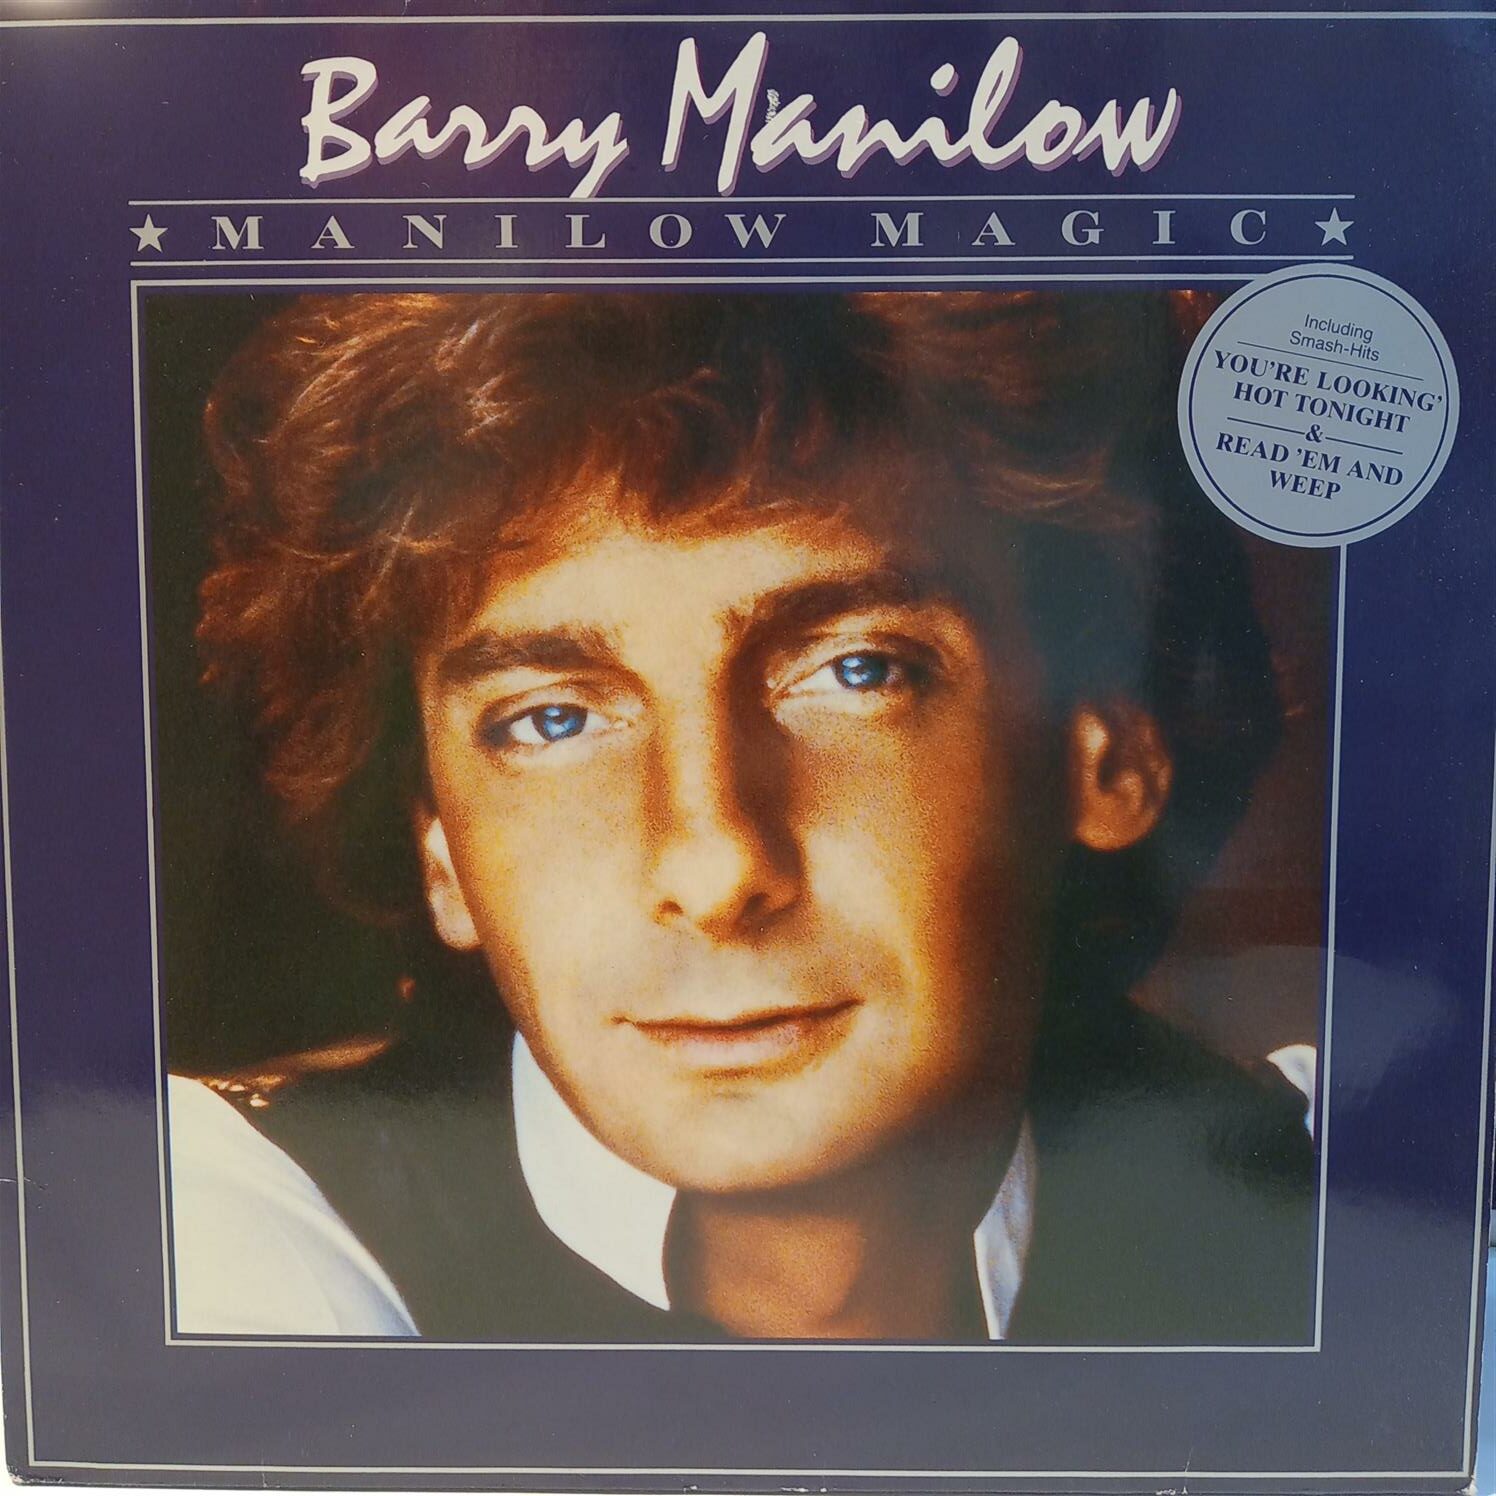 BARRY MANILOW – MANILOW MAGIC ON